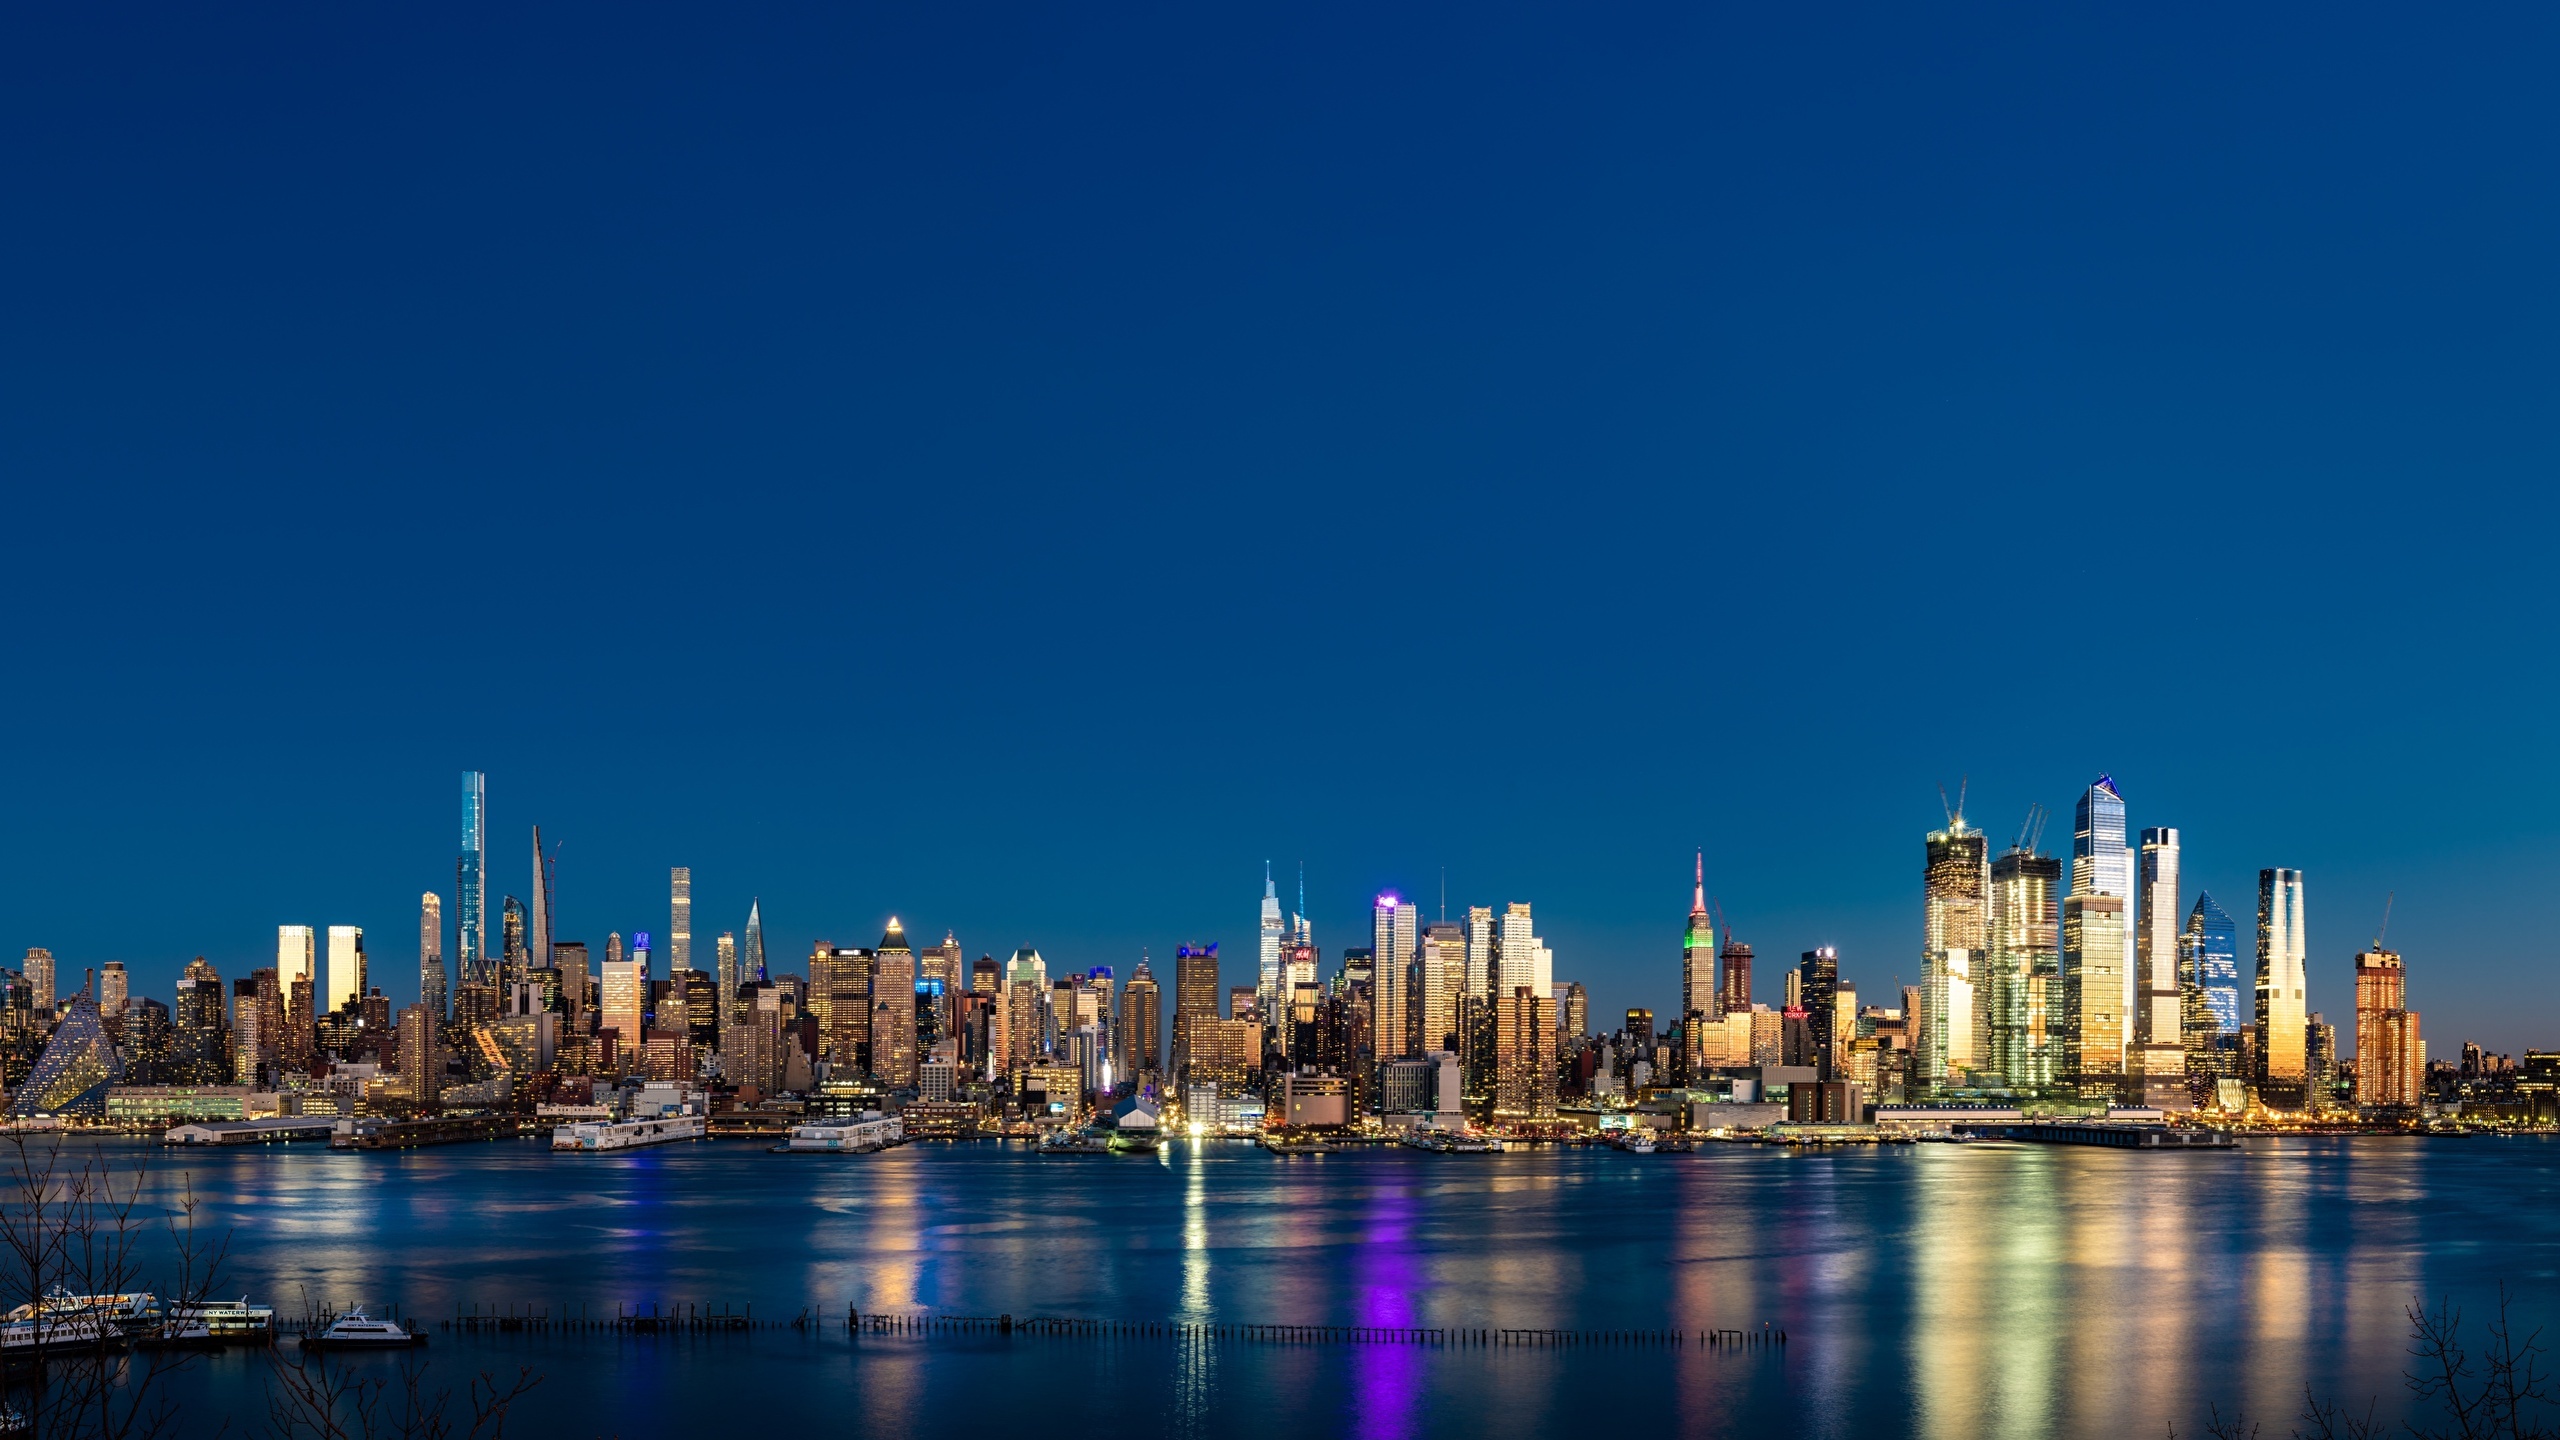 New York: The second-largest center for filmmaking and television production in the United States, producing about 200 feature films annually. 2560x1440 HD Background.